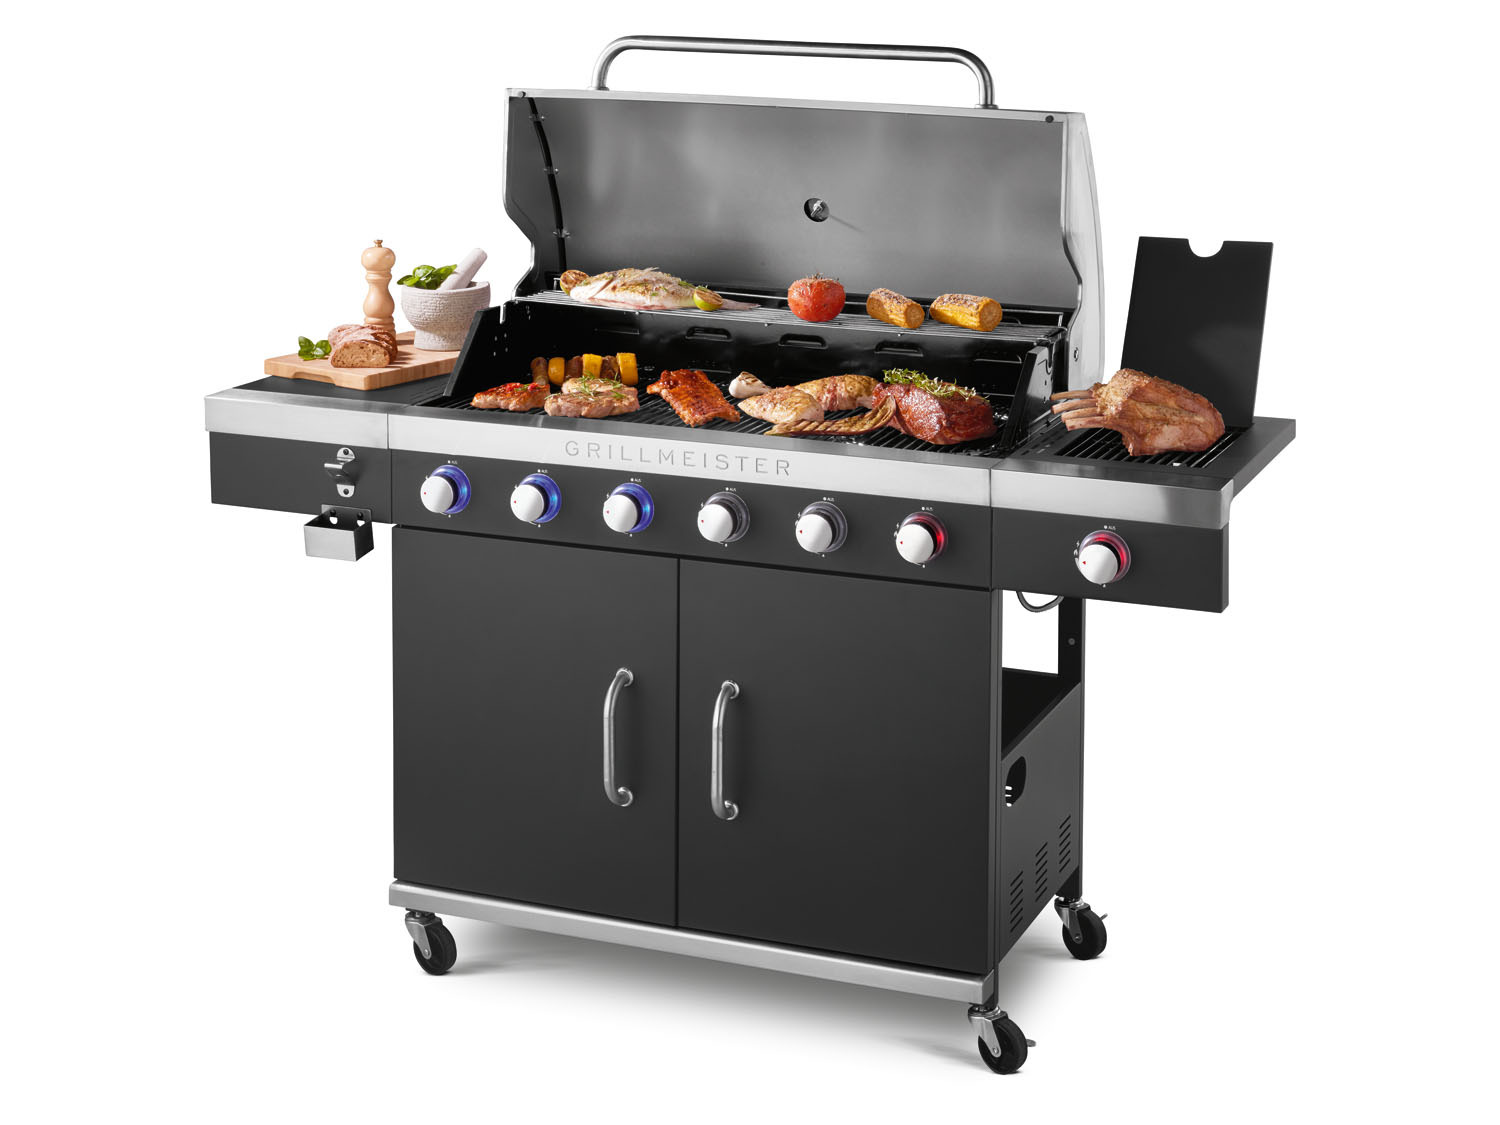 GRILLMEISTER Gasgrill, 6plus1 Brenner, 26,1 LIDL kW 